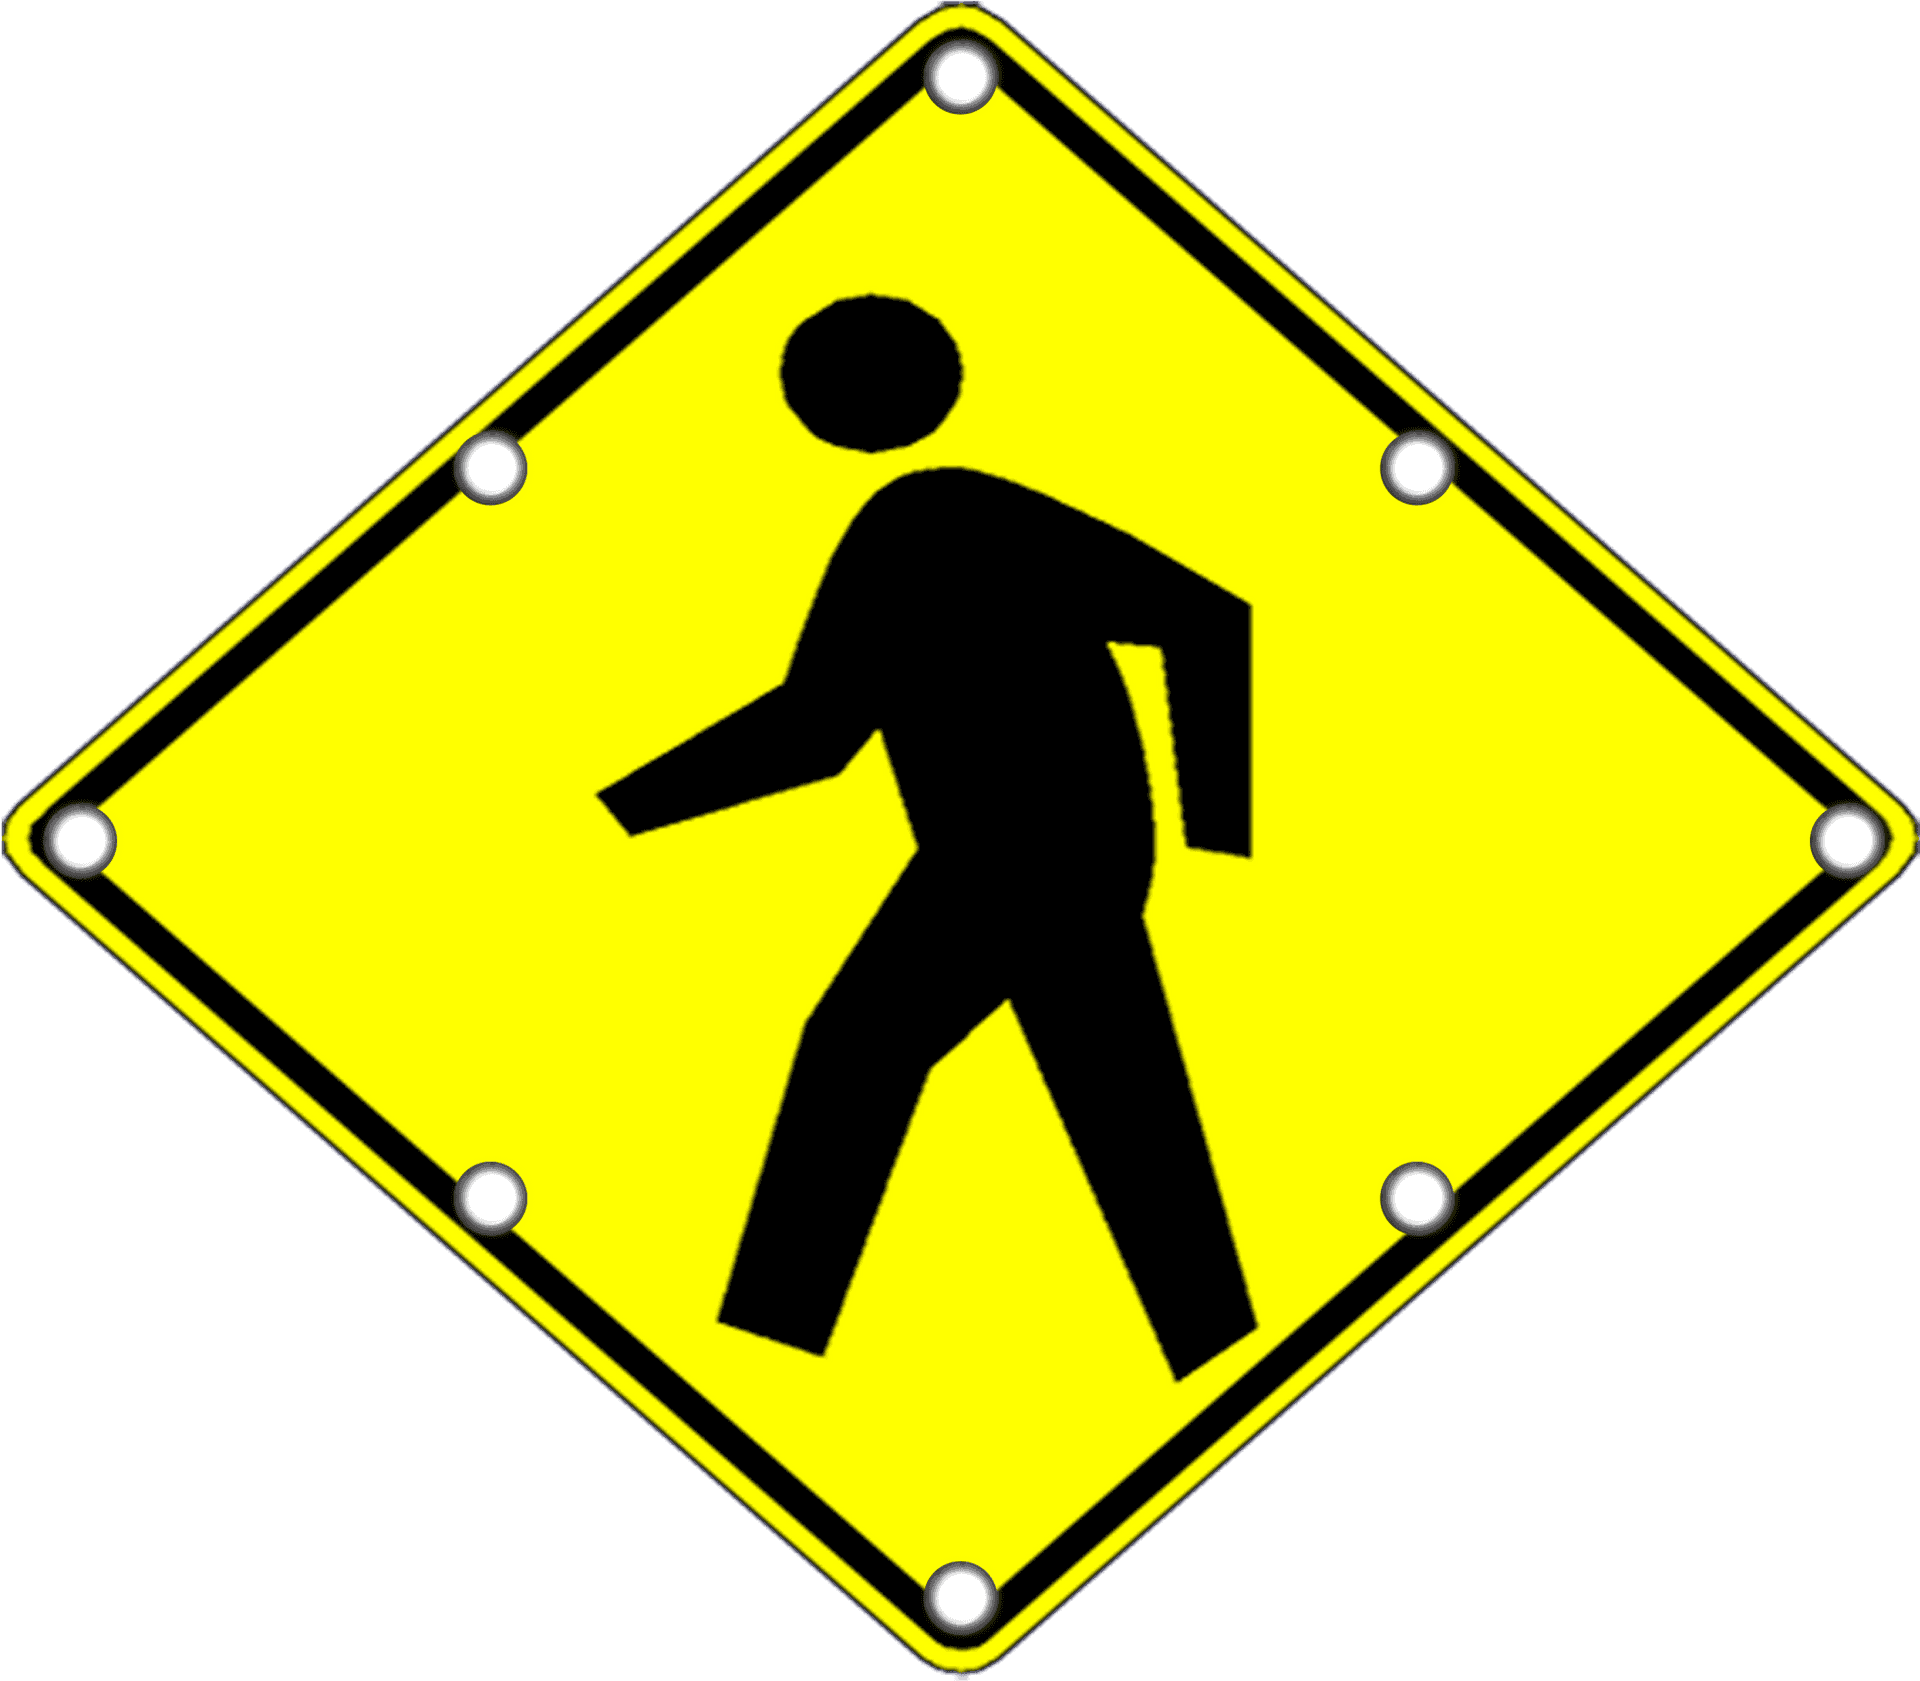 Pedestrian Crossing Sign PNG image